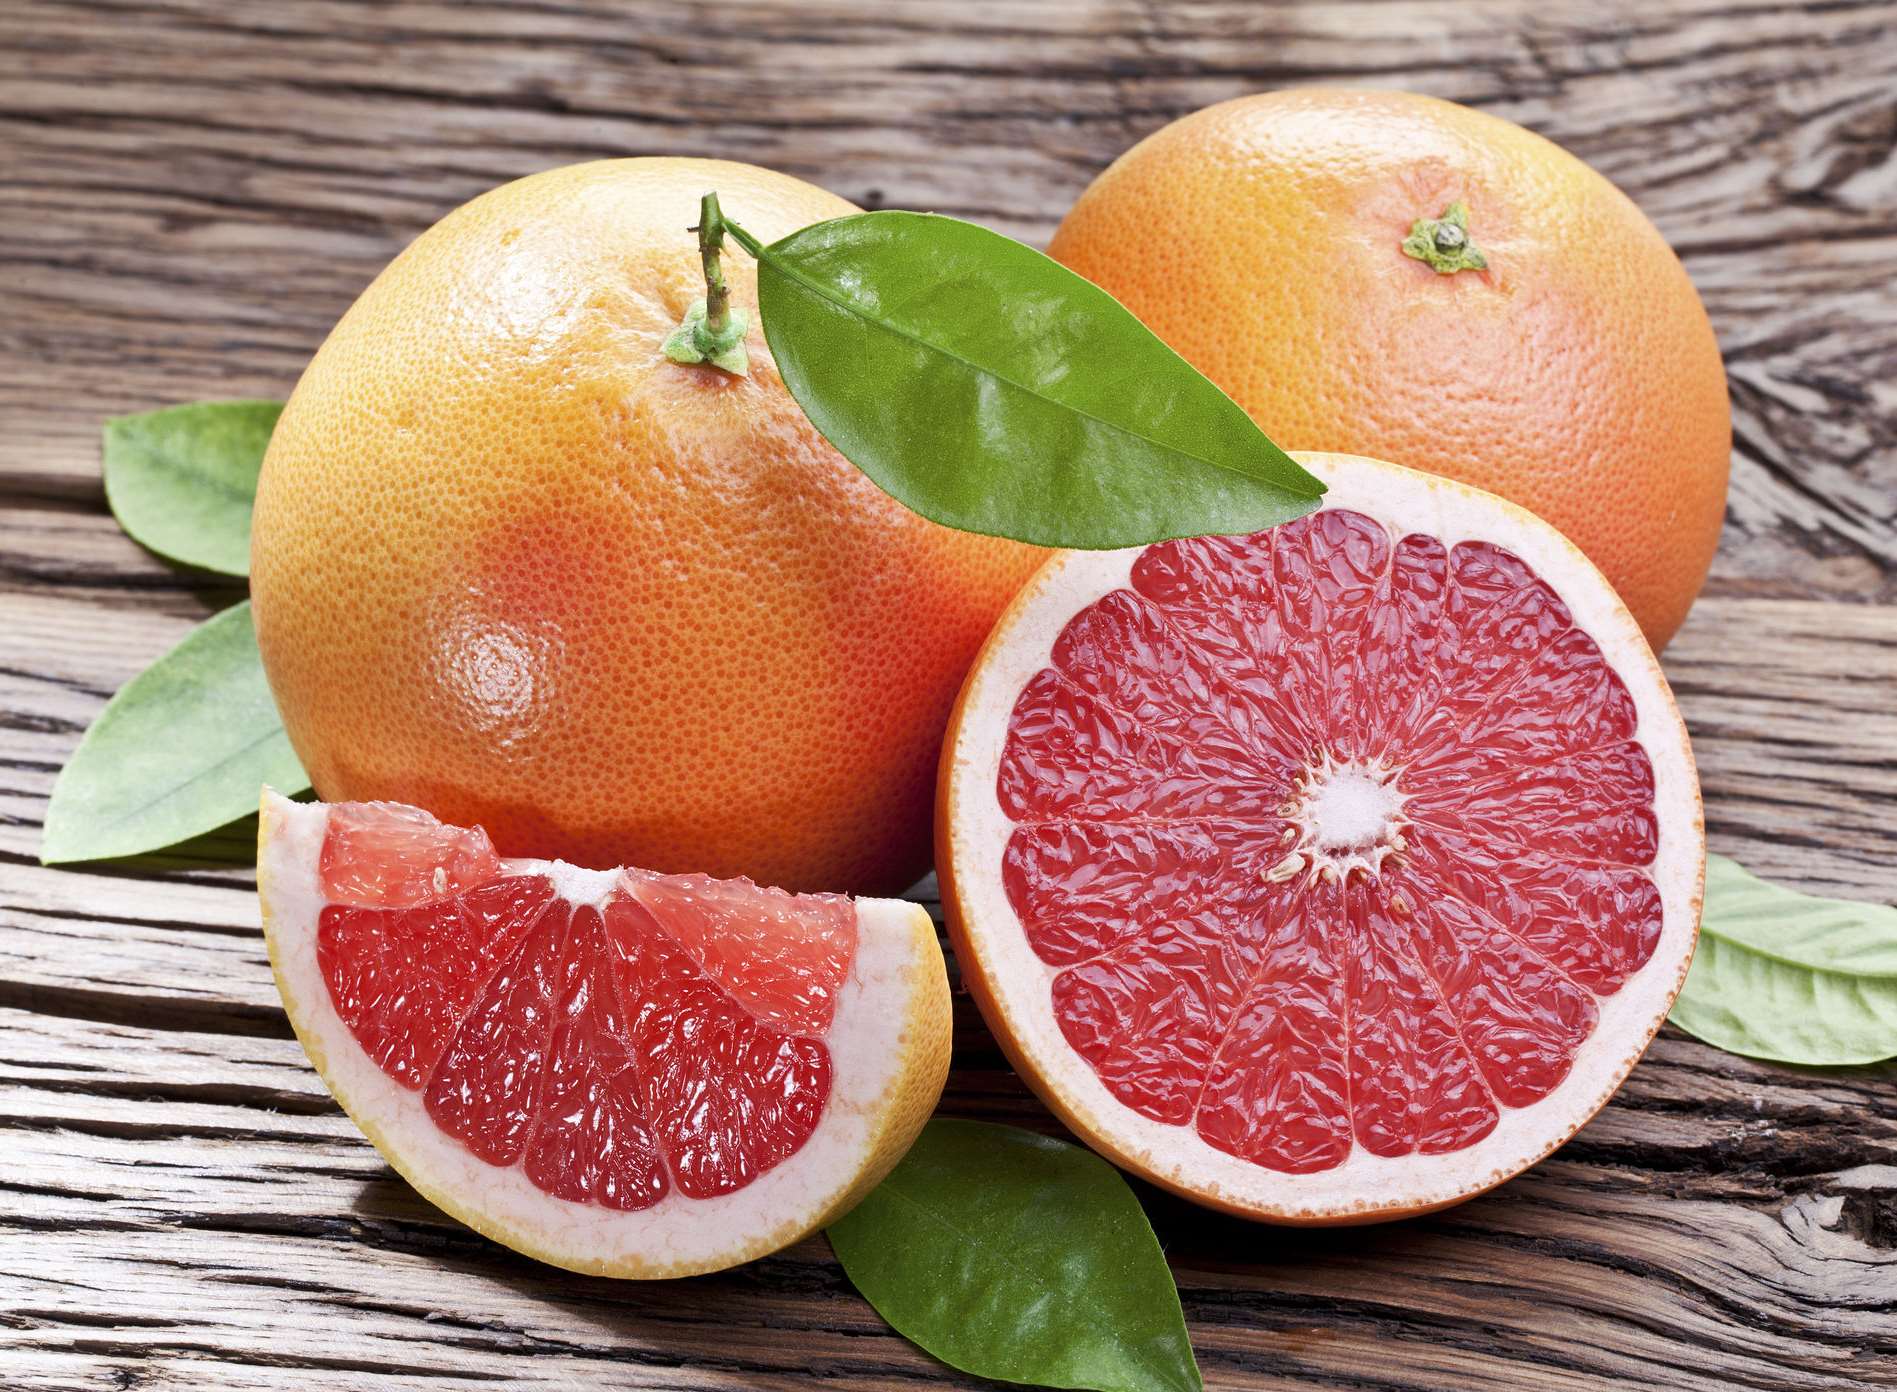 Fans claimed the grapefruit contains certain enzymes that, when eaten before other foods, helped burn off fat